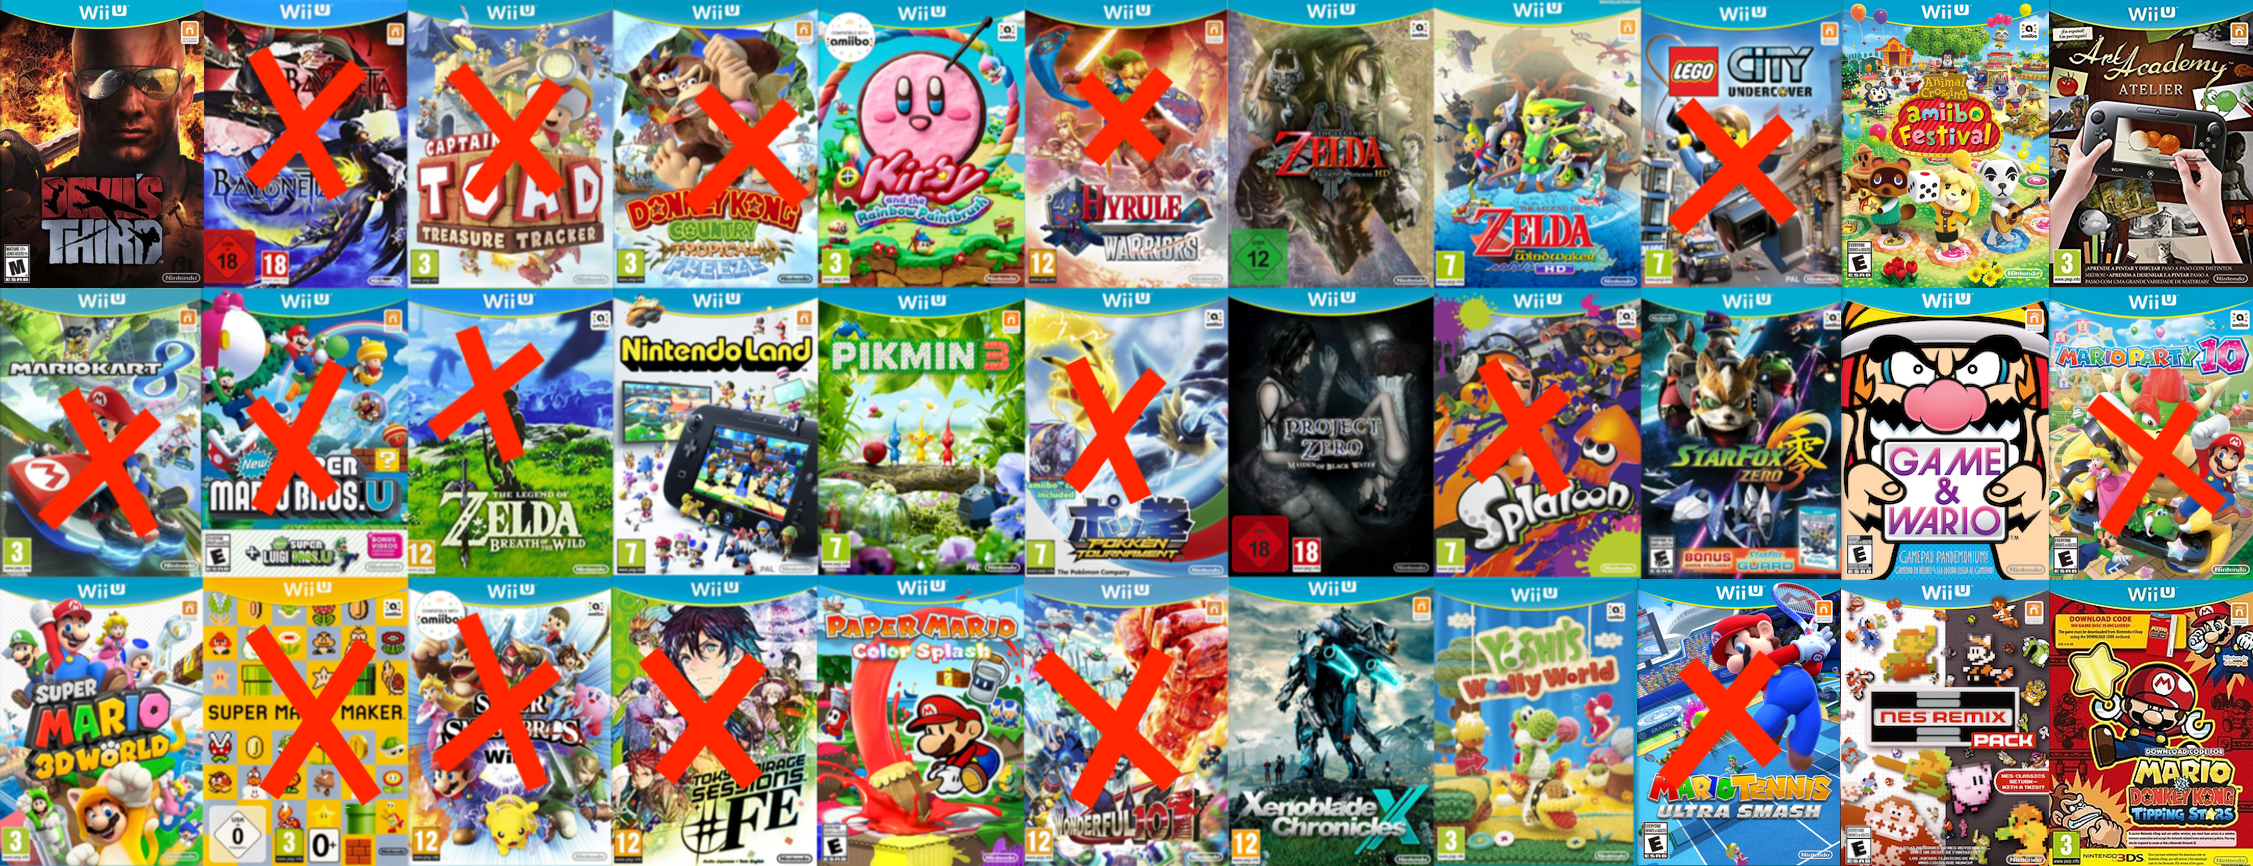 can wii u games be played on switch